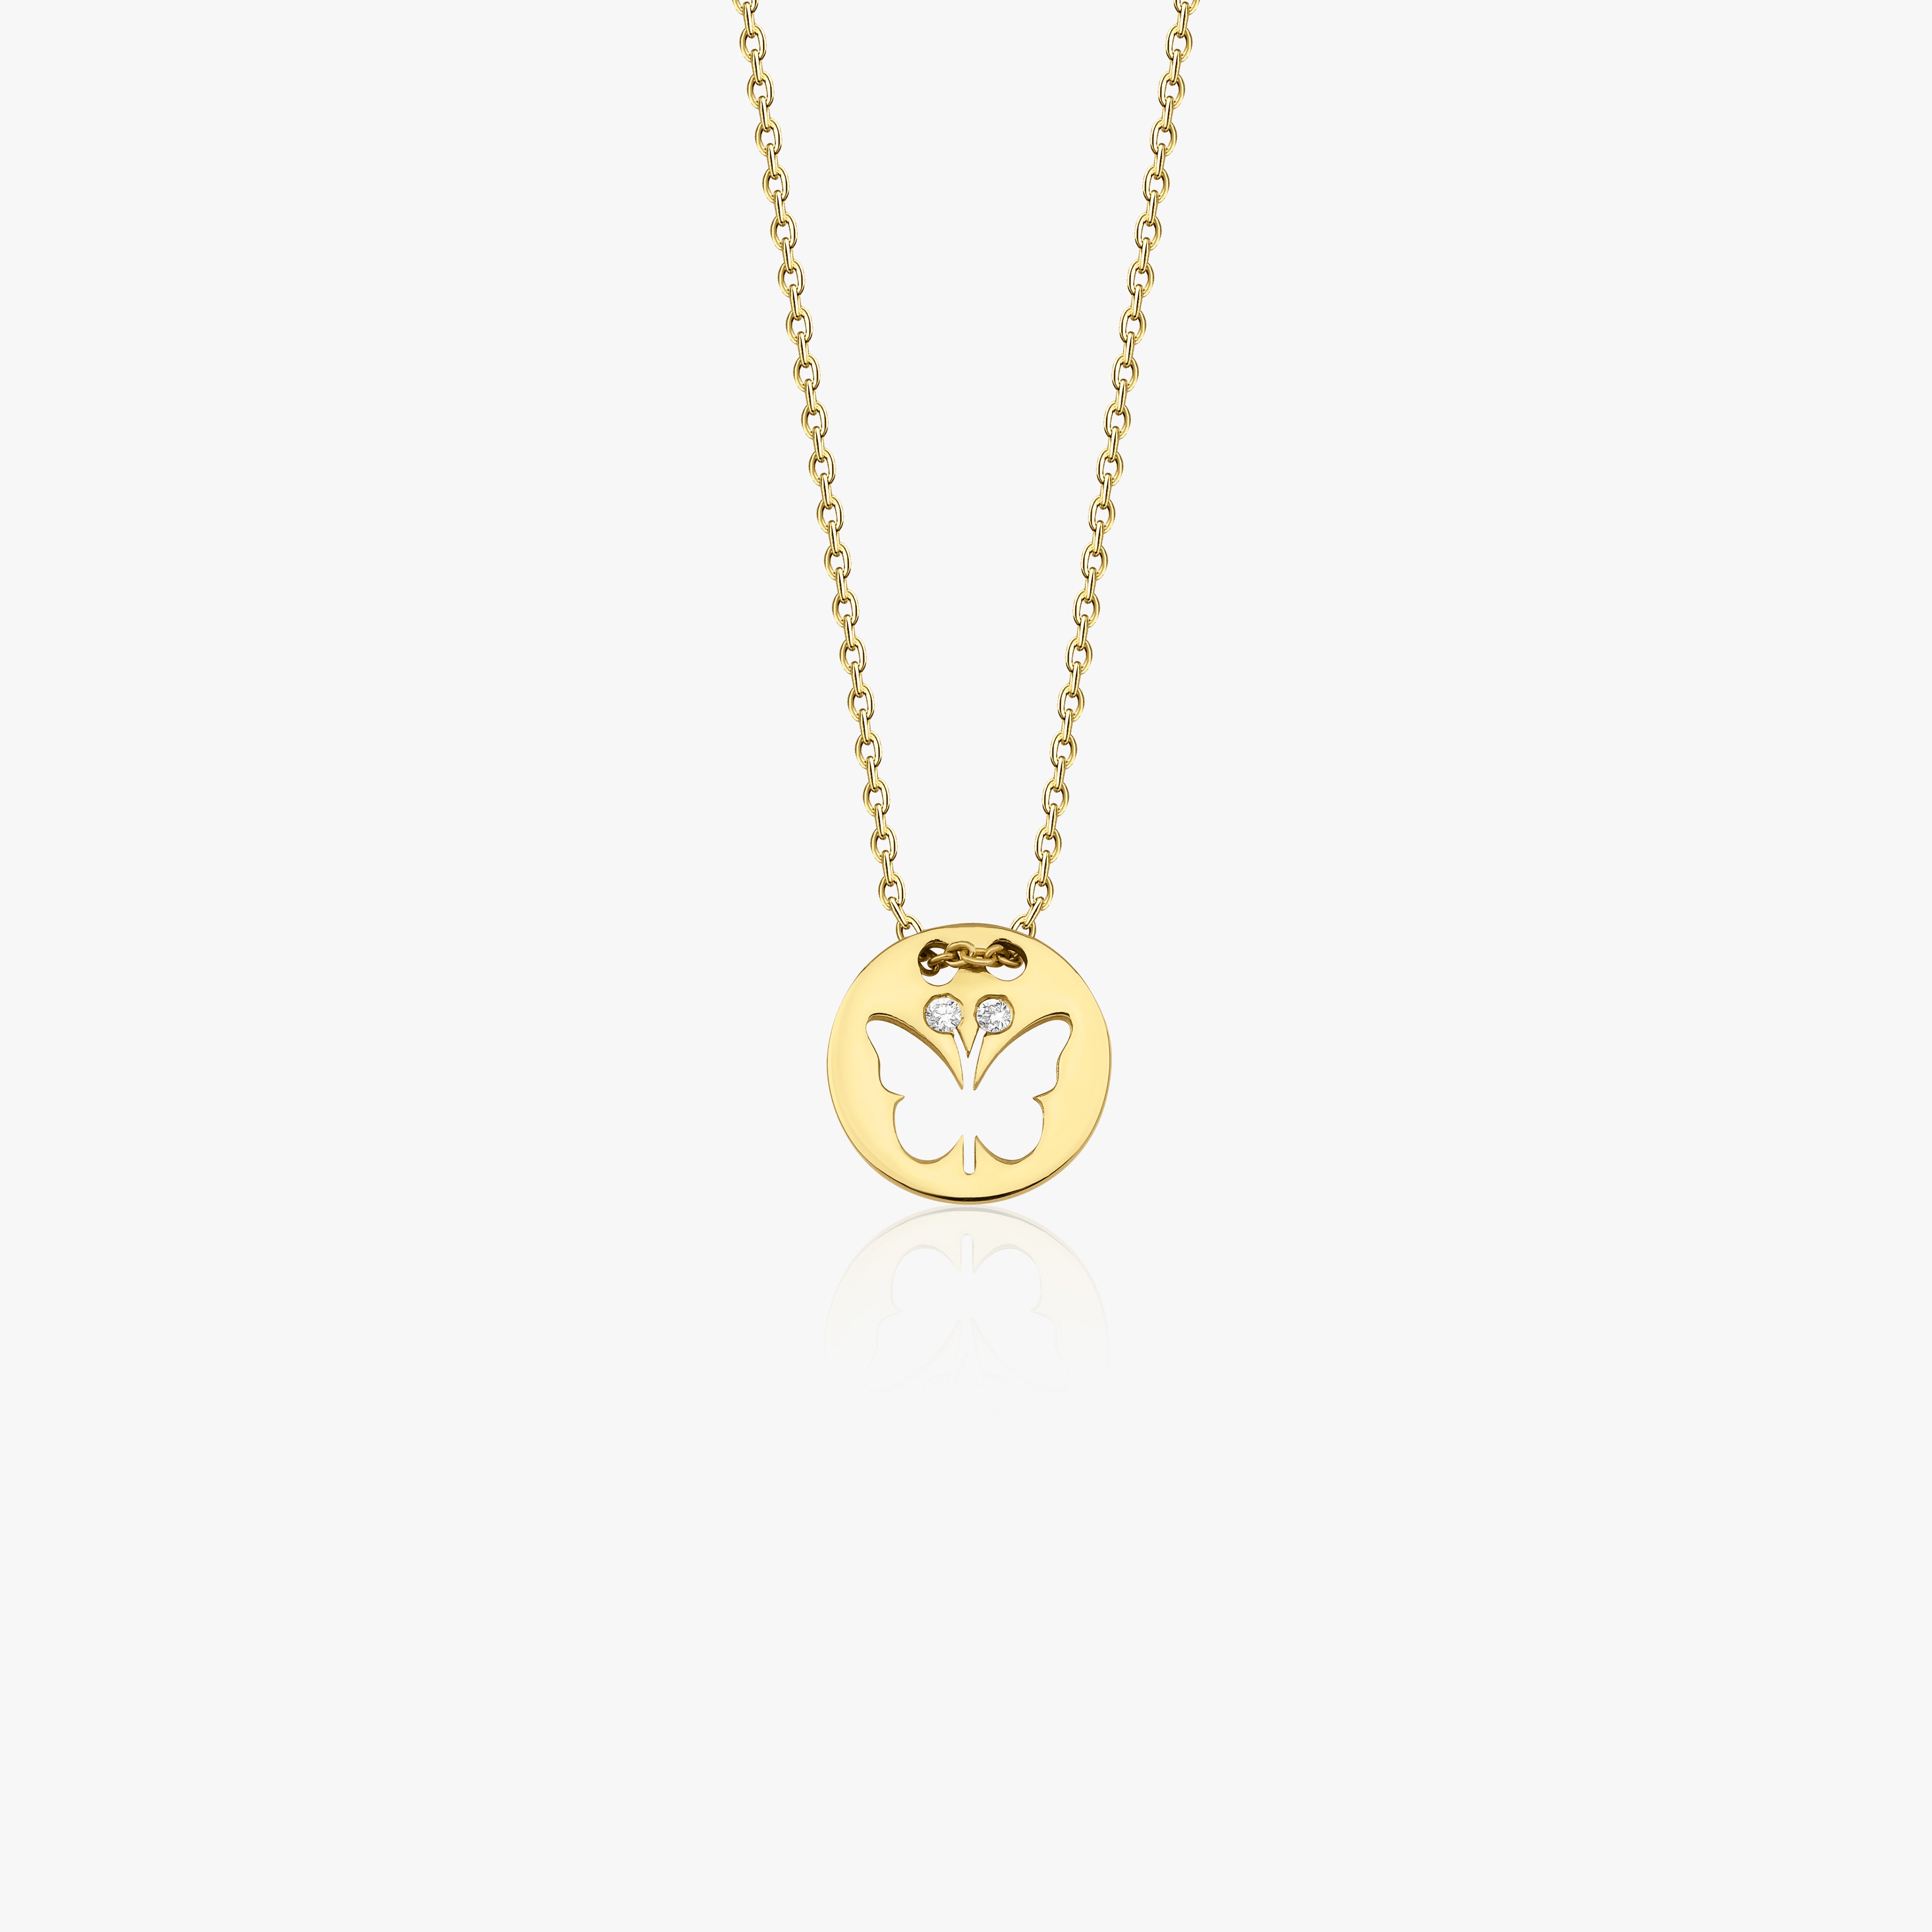 Dainty Diamond Butterfly Necklace Available in 14K and 18K Gold